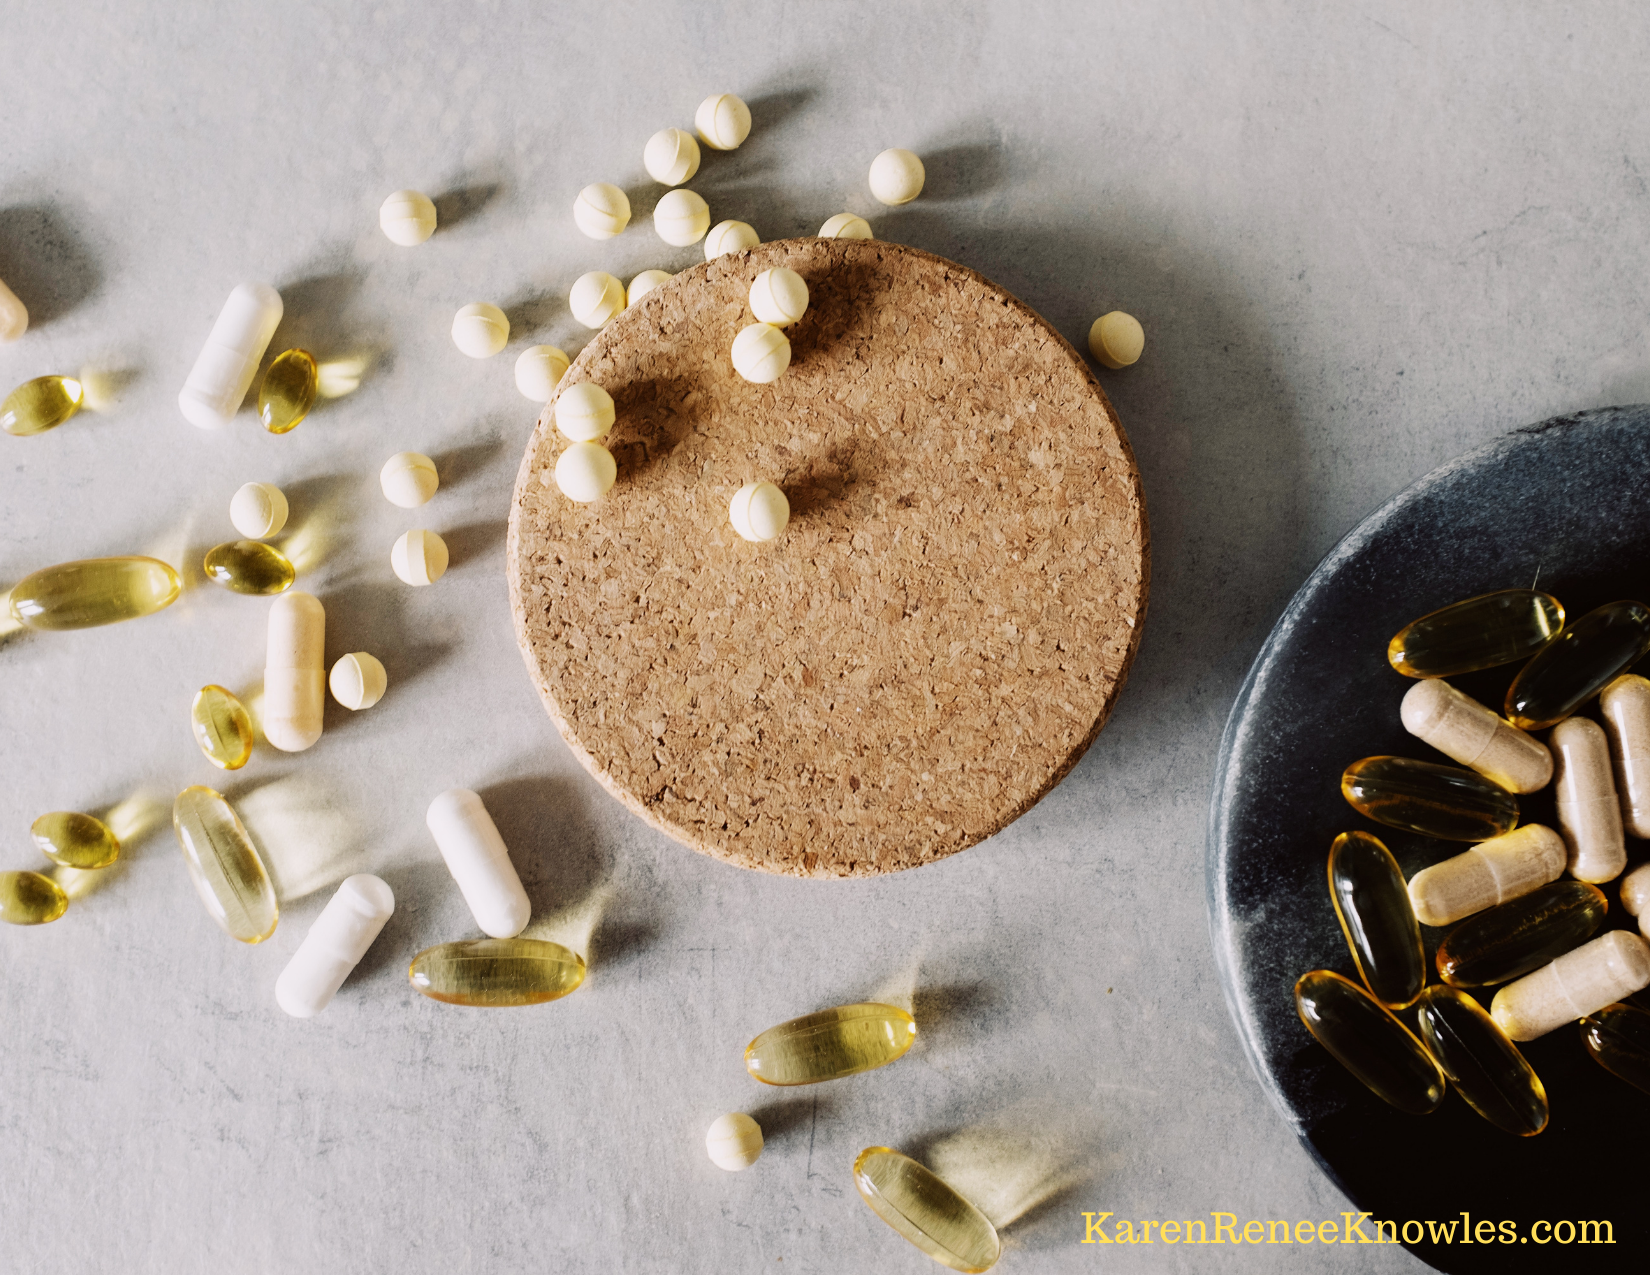 Common Myths about Vitamin and Mineral Supplements